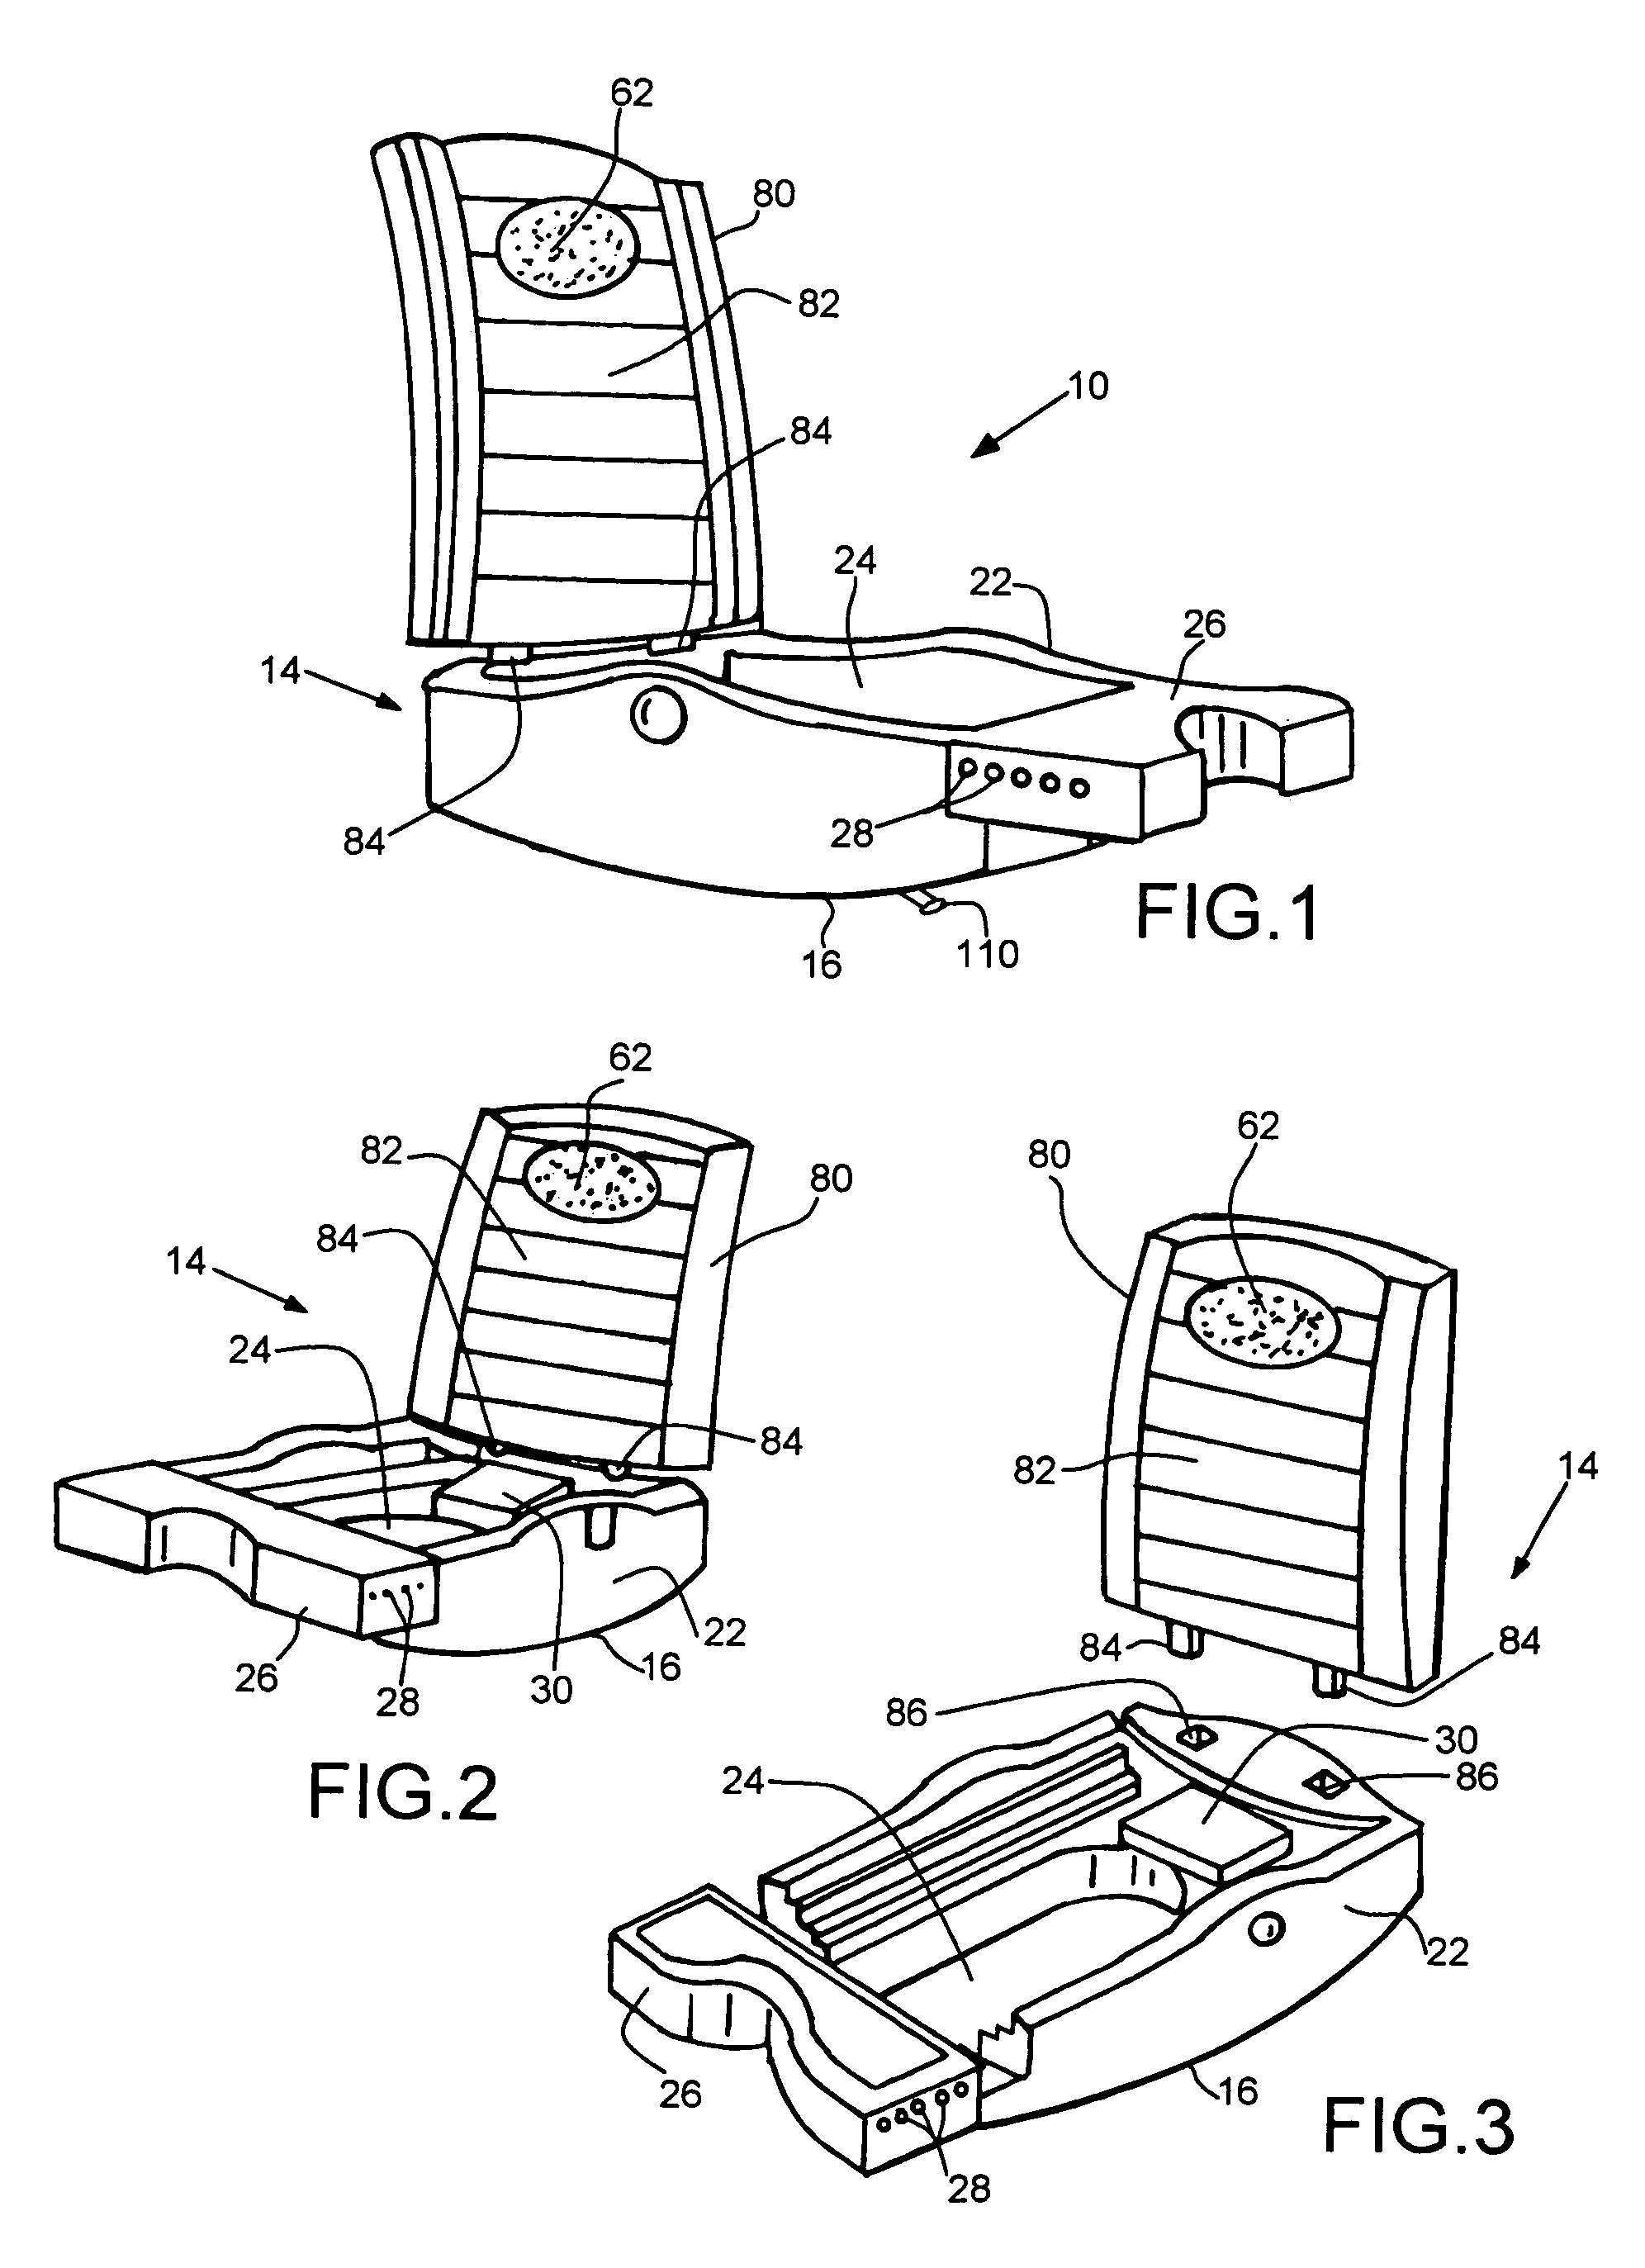 Infant seat base with vehicle travel simulation means for mounting a vehicle infant seat